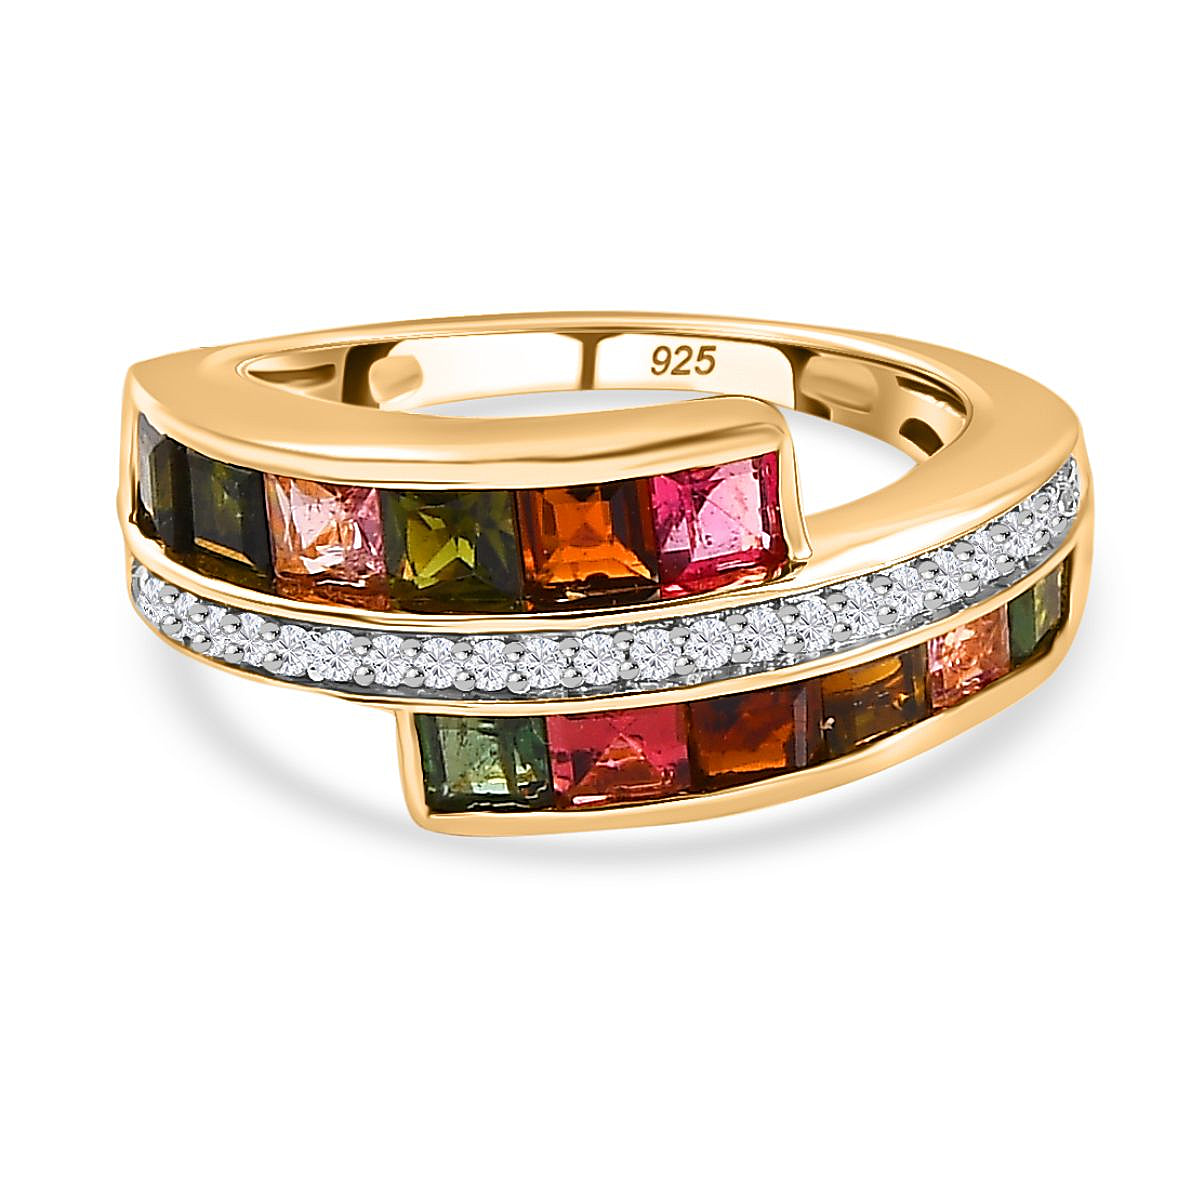 Multi-Tourmaline & Natural Zircon Half-Eternity Bypass Ring in 18K Yellow Gold Vermeil Plated Sterling Silver 2.27 Ct.